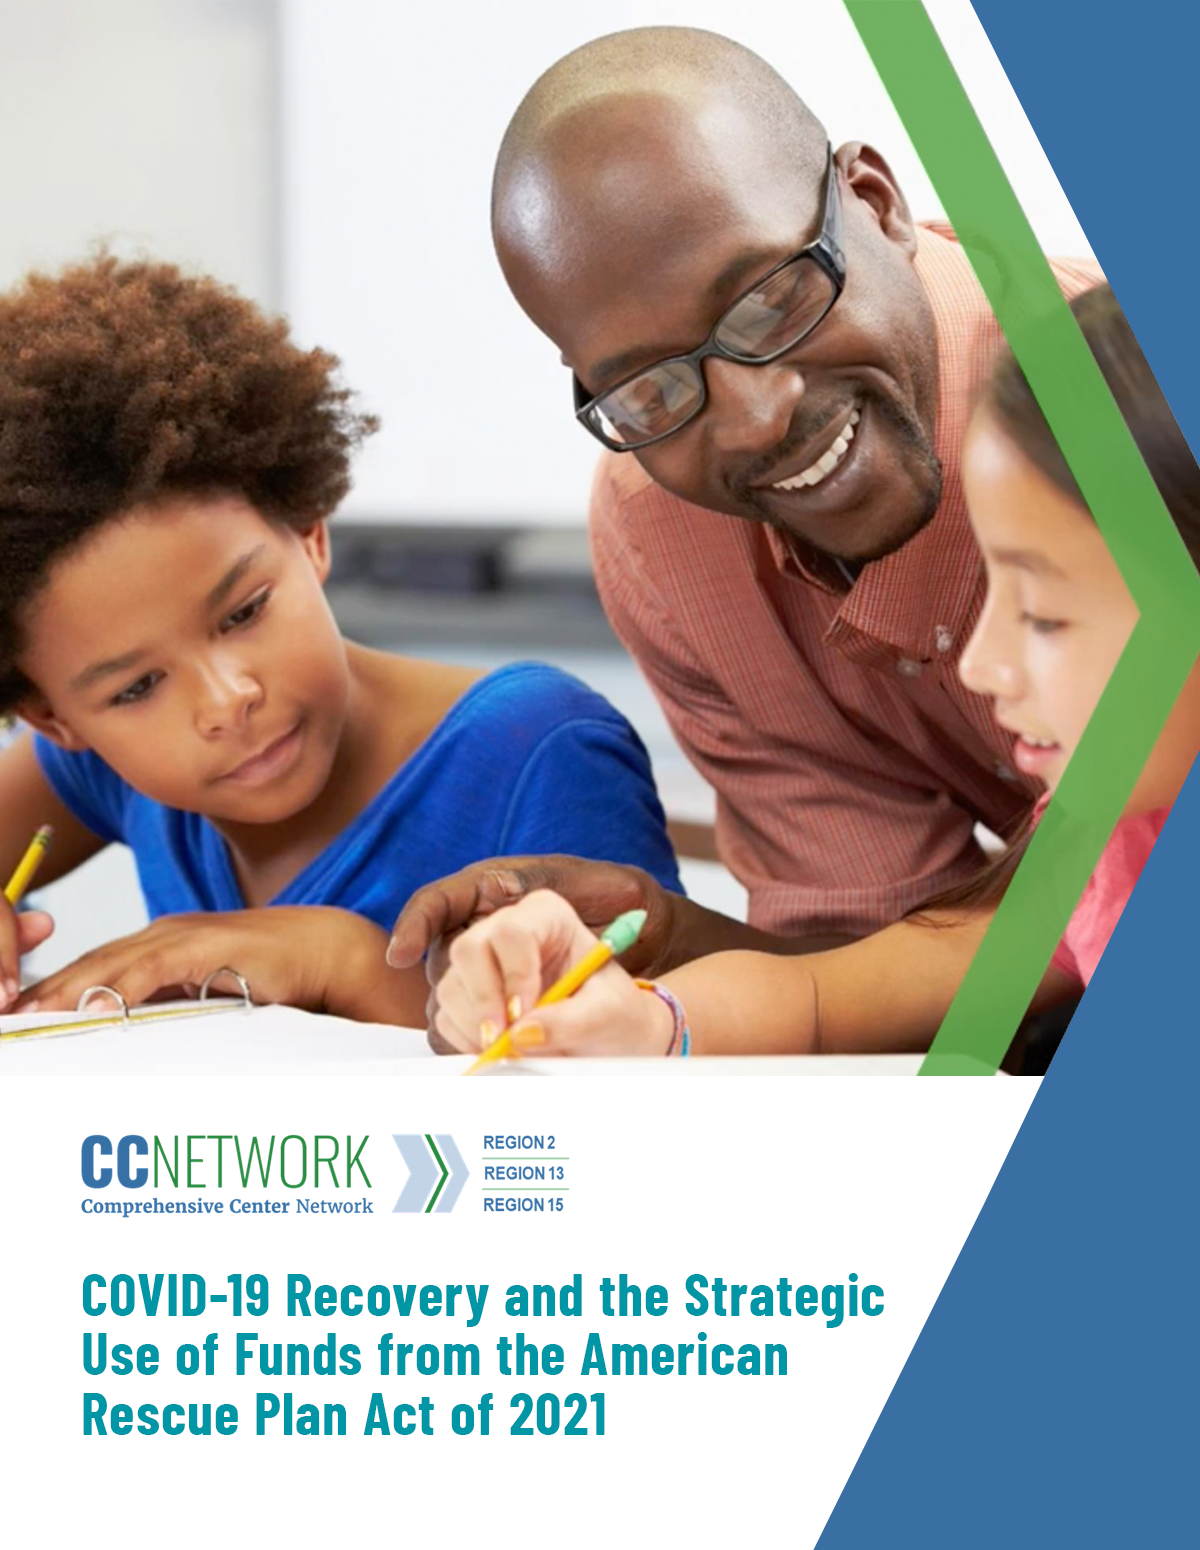 COVID-19 Recovery and the Strategic Use of Funds from the American Rescue Plan Act of 2021